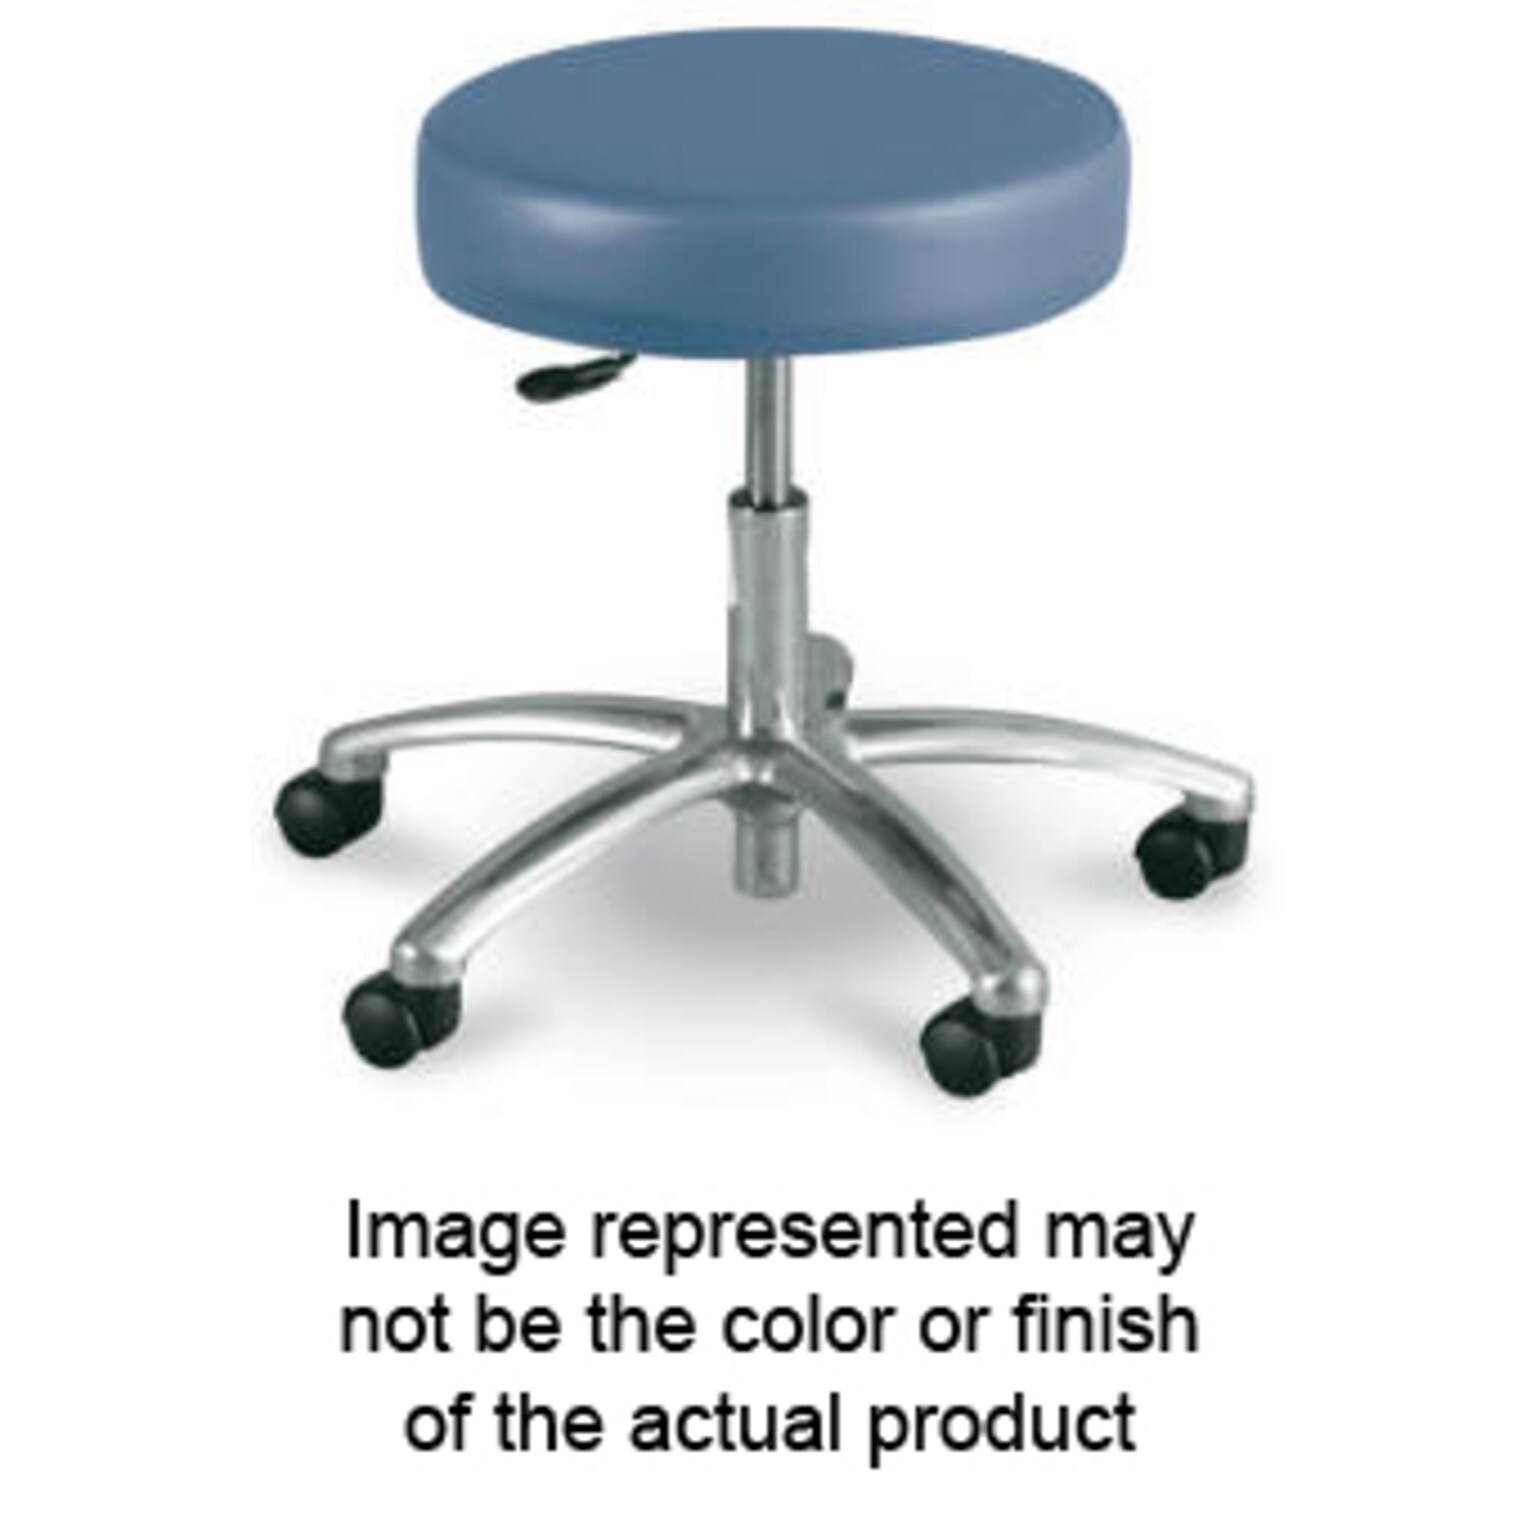 Brandt Airbuoy Exam Room Stool without Backrest, 16-3/4 - 21-3/4, Teal